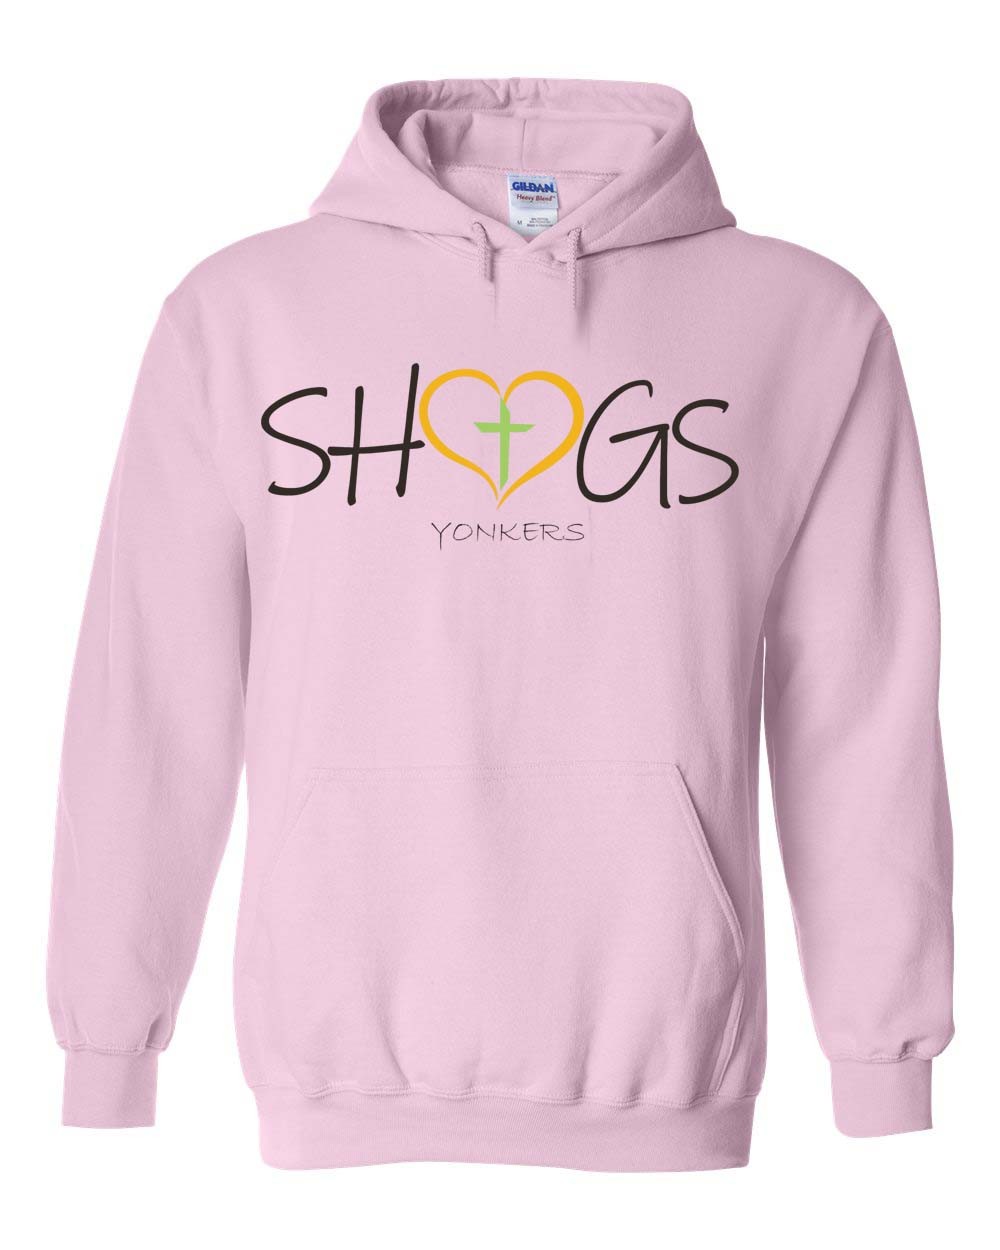 STAFF SHGS Spirit Pullover Hoodie w/ Heart Logo - Please Allow 2-3 Weeks for Delivery